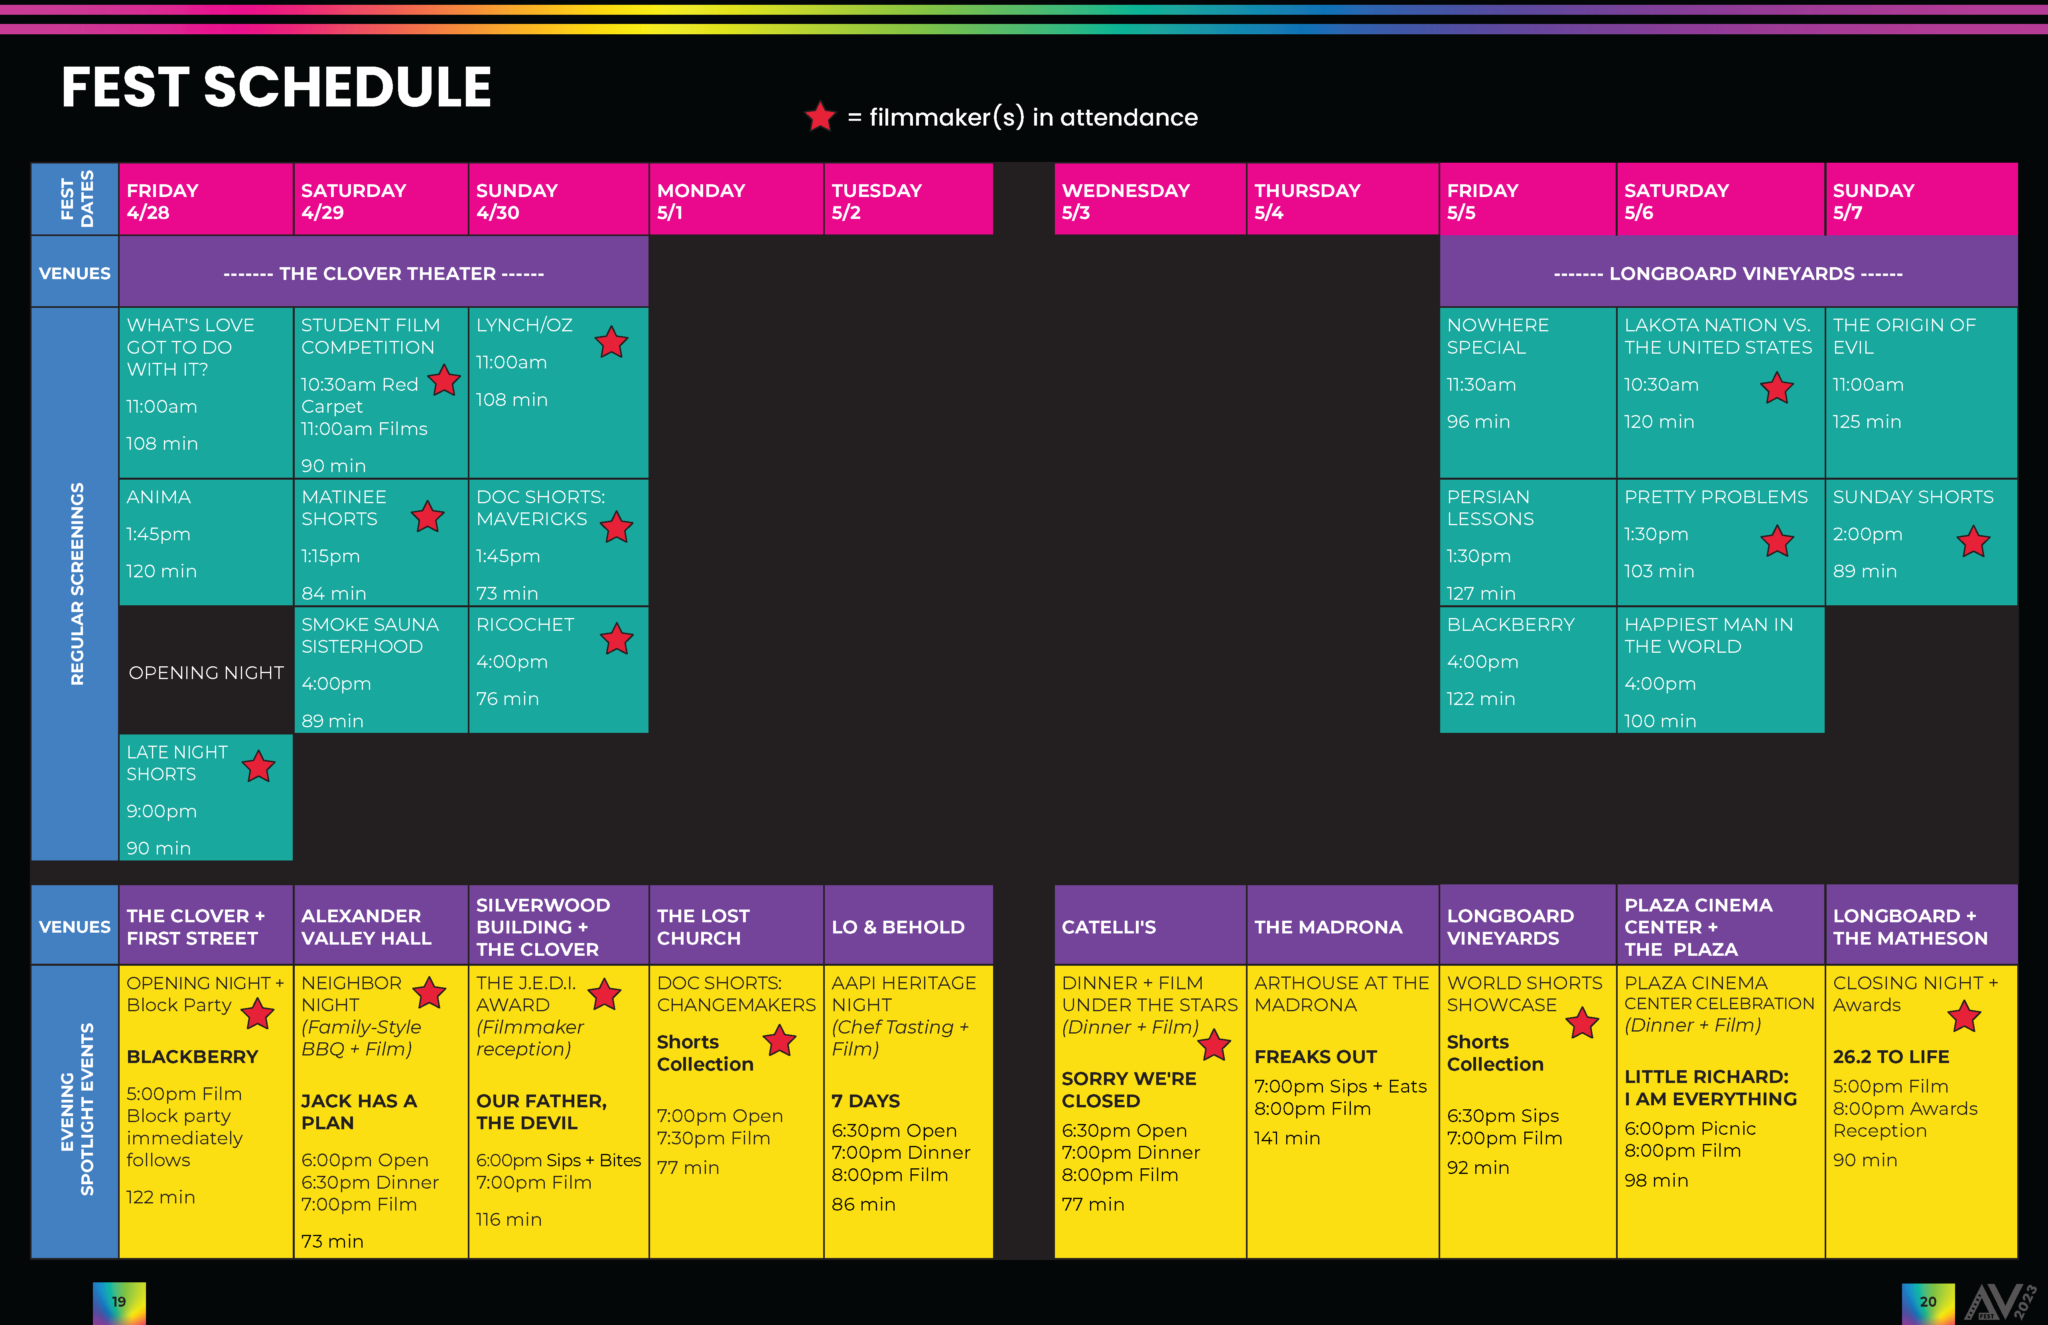 A grid with festival screening times and locations